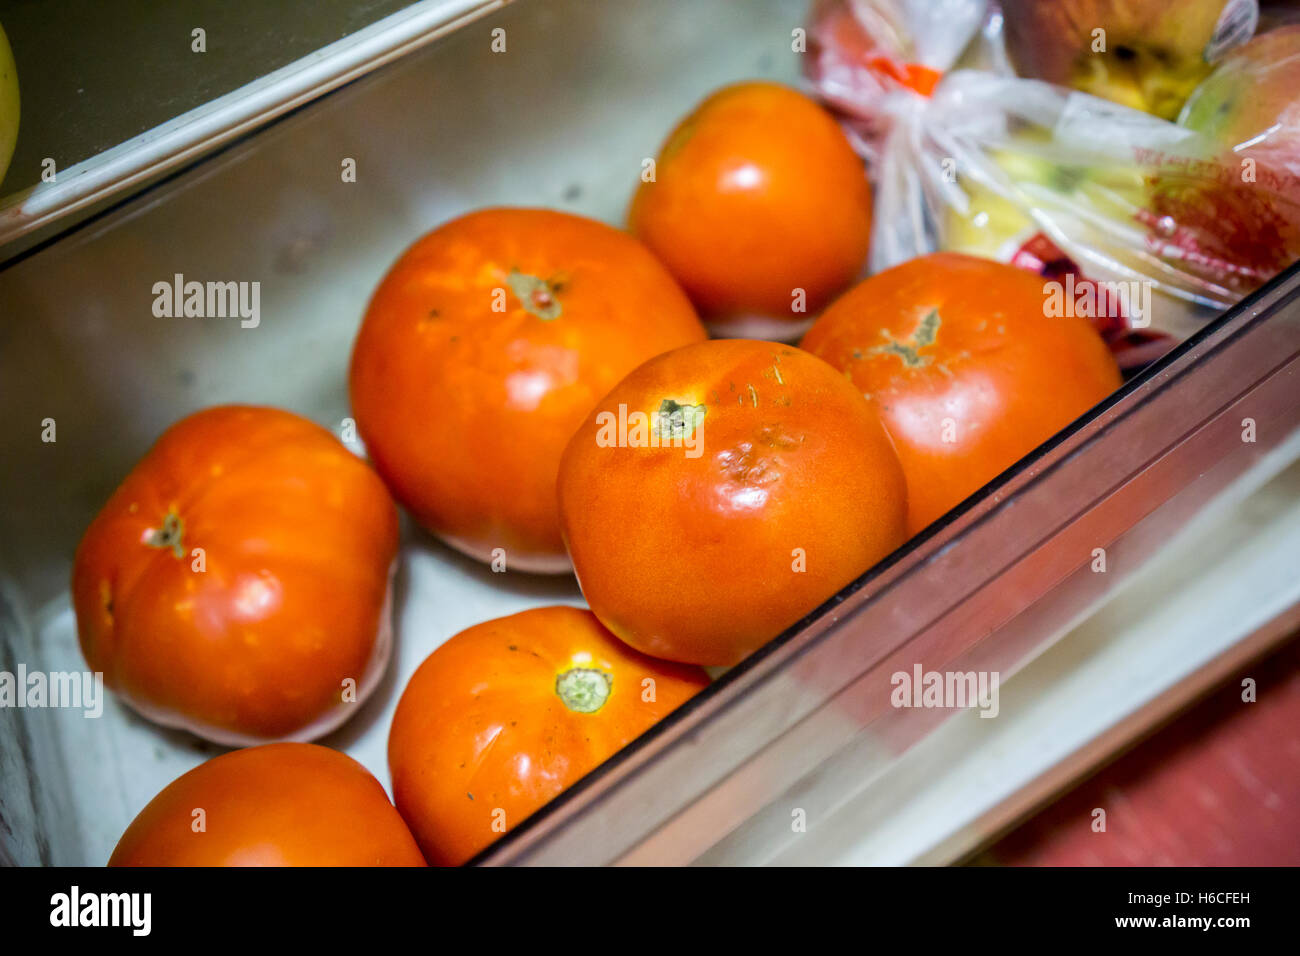 Tomatoes stored in a refrigerator in New York on Wednesday, October 19, 2016. A study by the University of Florida found that the old adage of keeping your tomatoes out of the refrigerator is correct. The report states that cold storage reduces the flavor of the fruit by affecting its genetics.  (© Richard B. Levine) Stock Photo